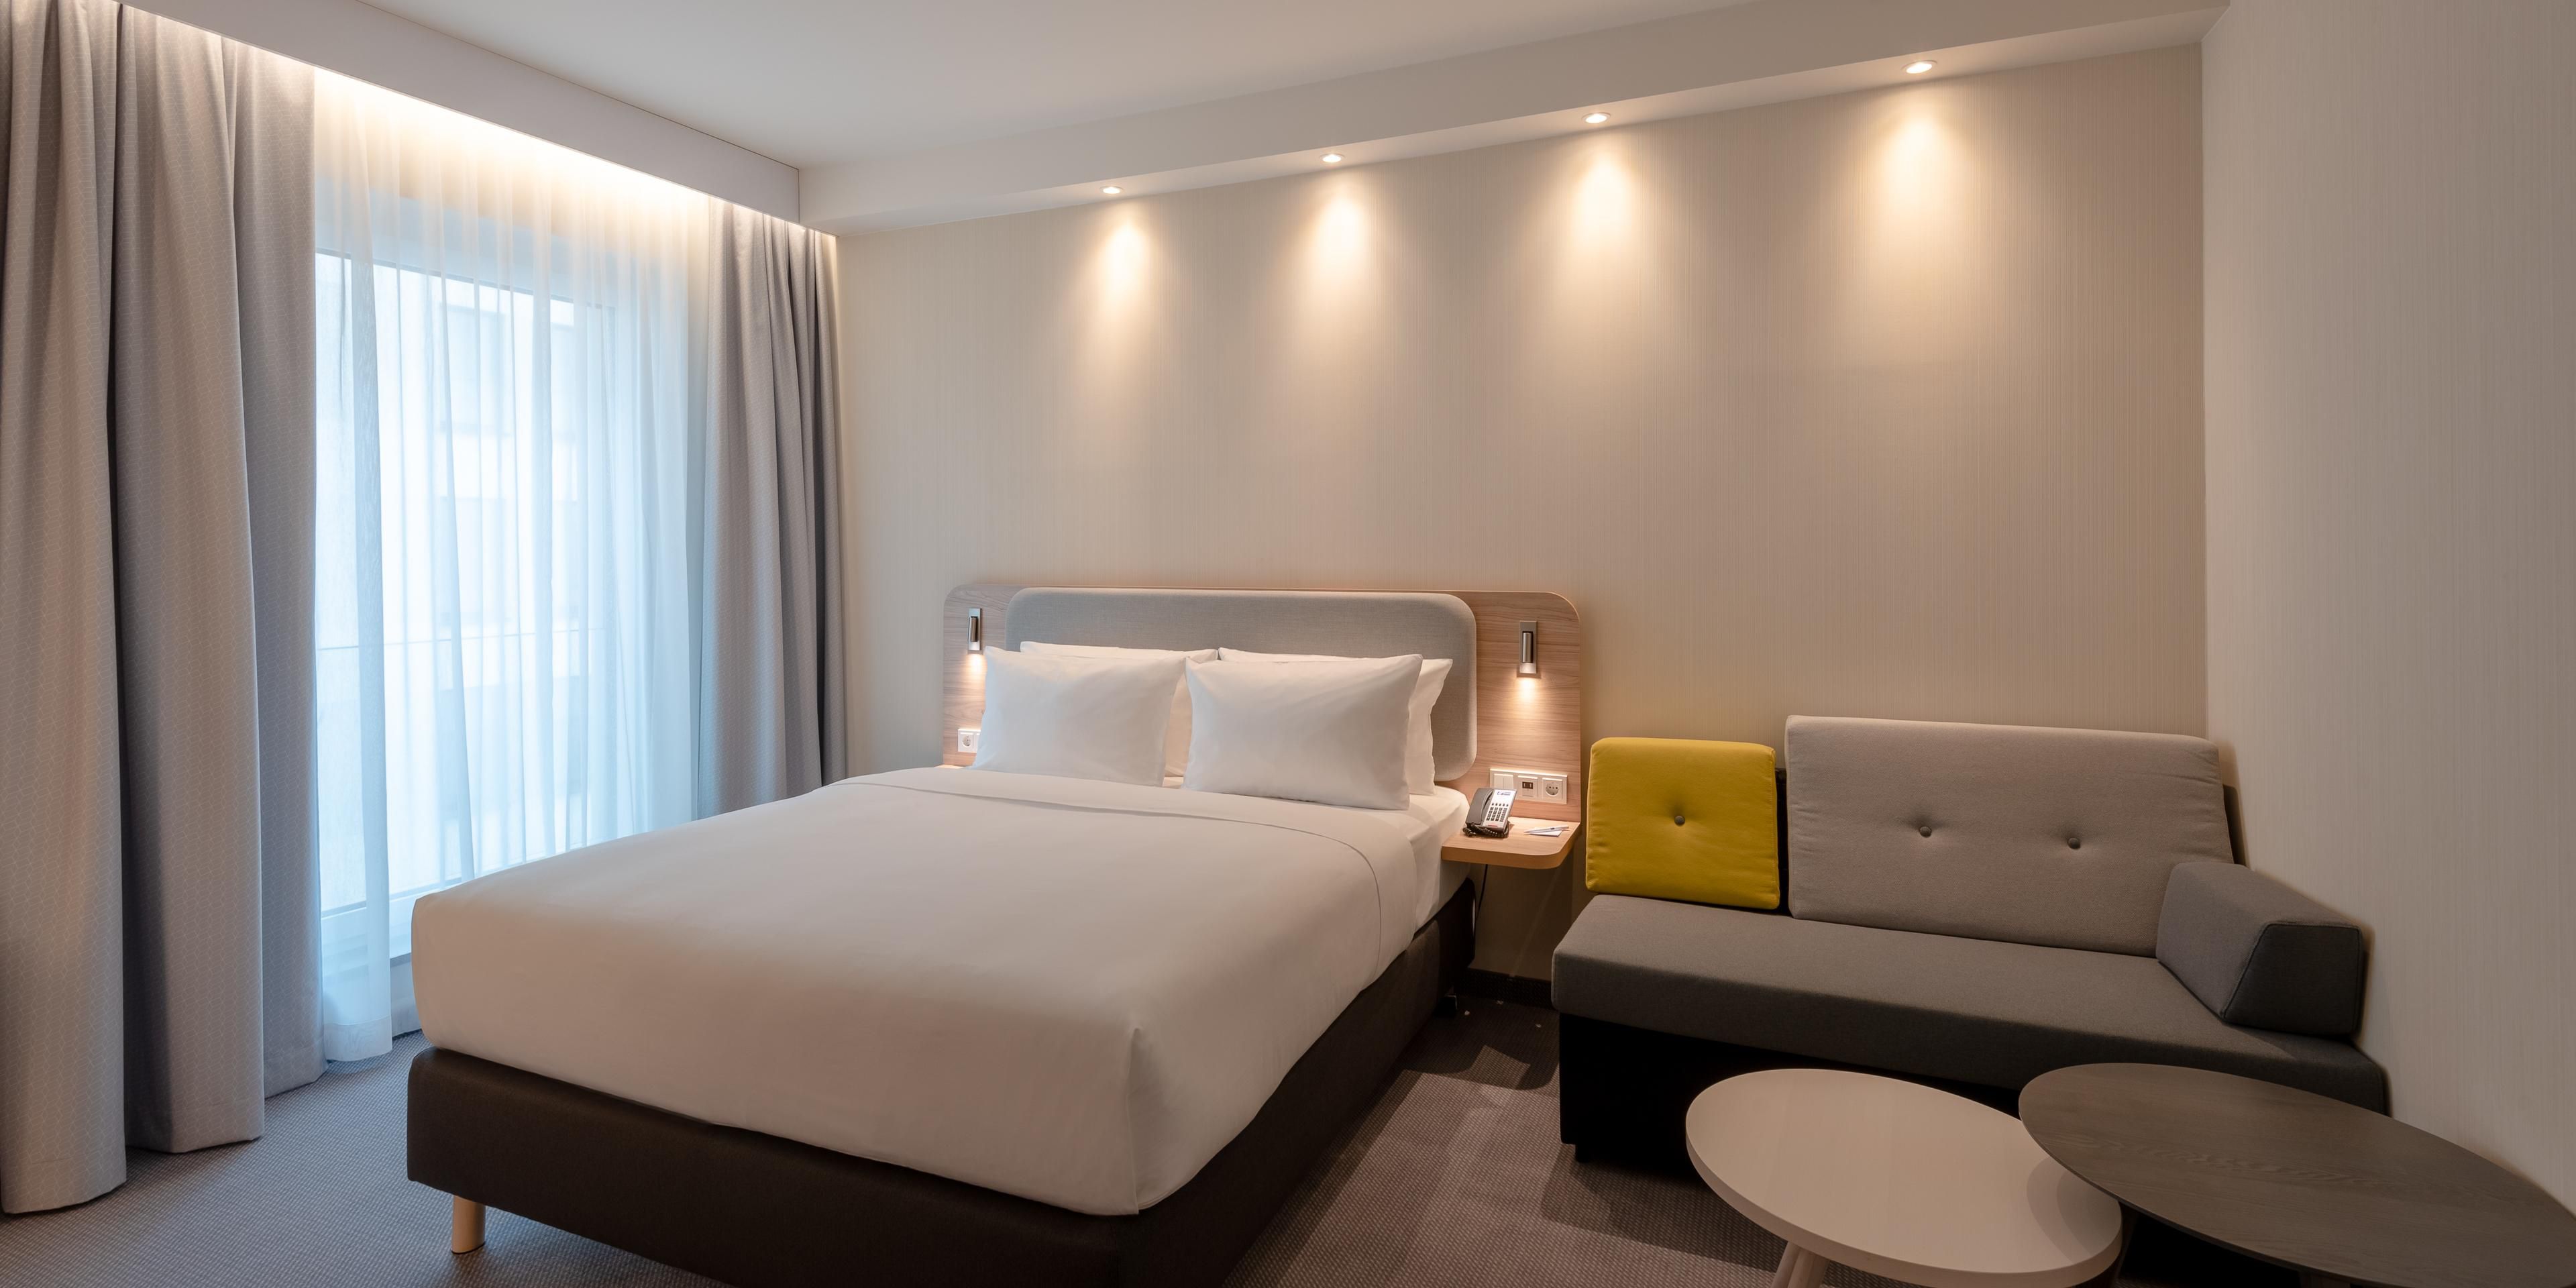 How about a city trip over Easter? Come and spend Easter at the Holiday Inn Express Munich North ,the perfect location for visiting friends and family.